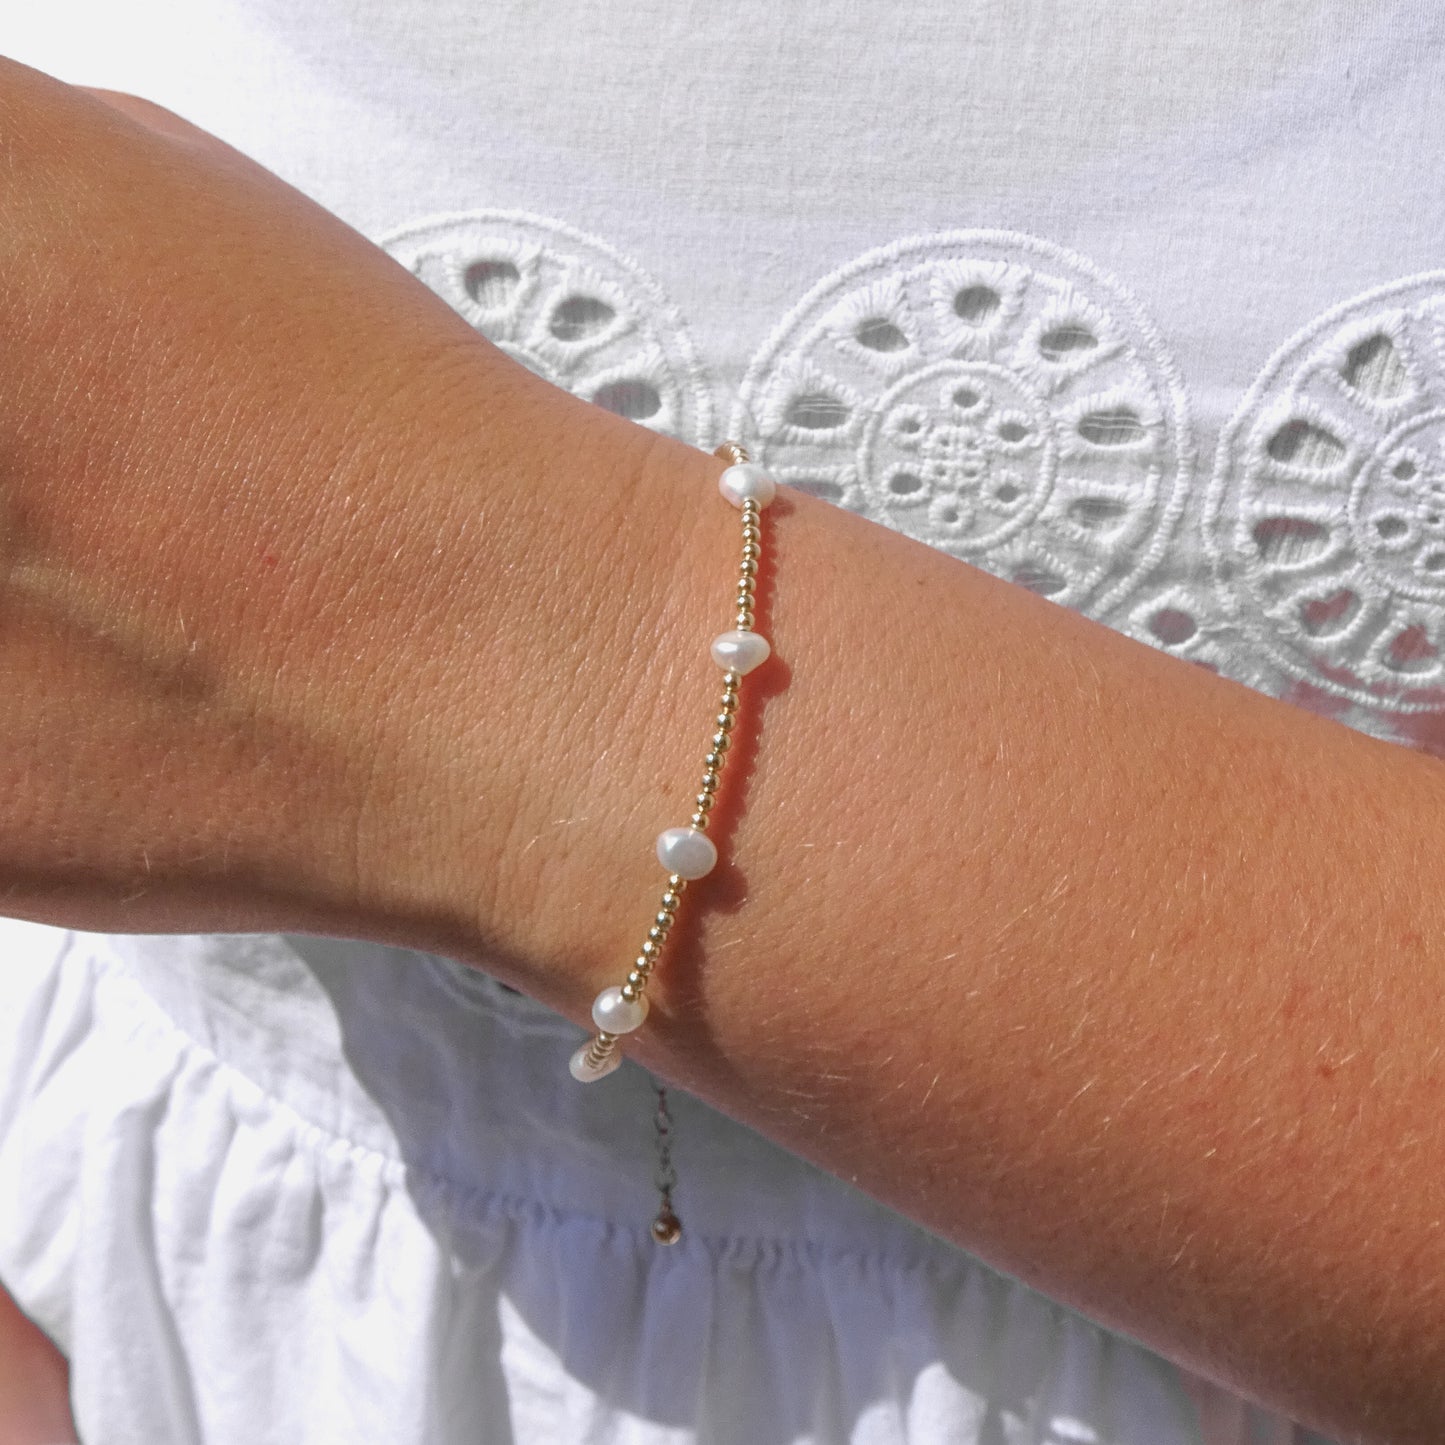 Dainty Beaded Bracelet with Freshwater Pearls